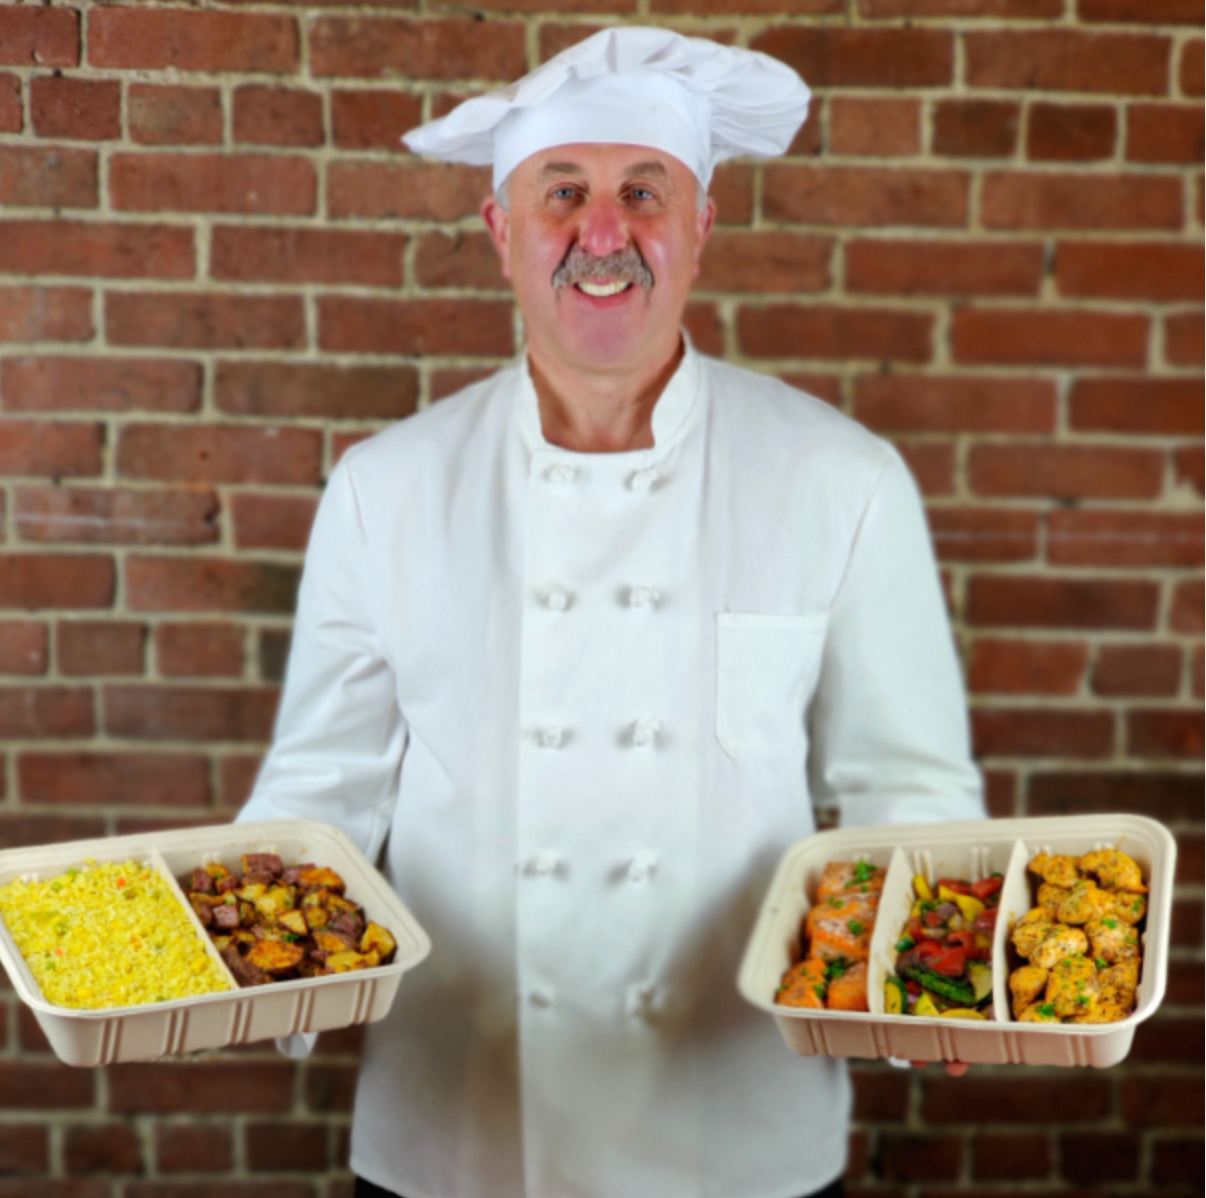 a chef holding two trays of food in front of a brick wall.